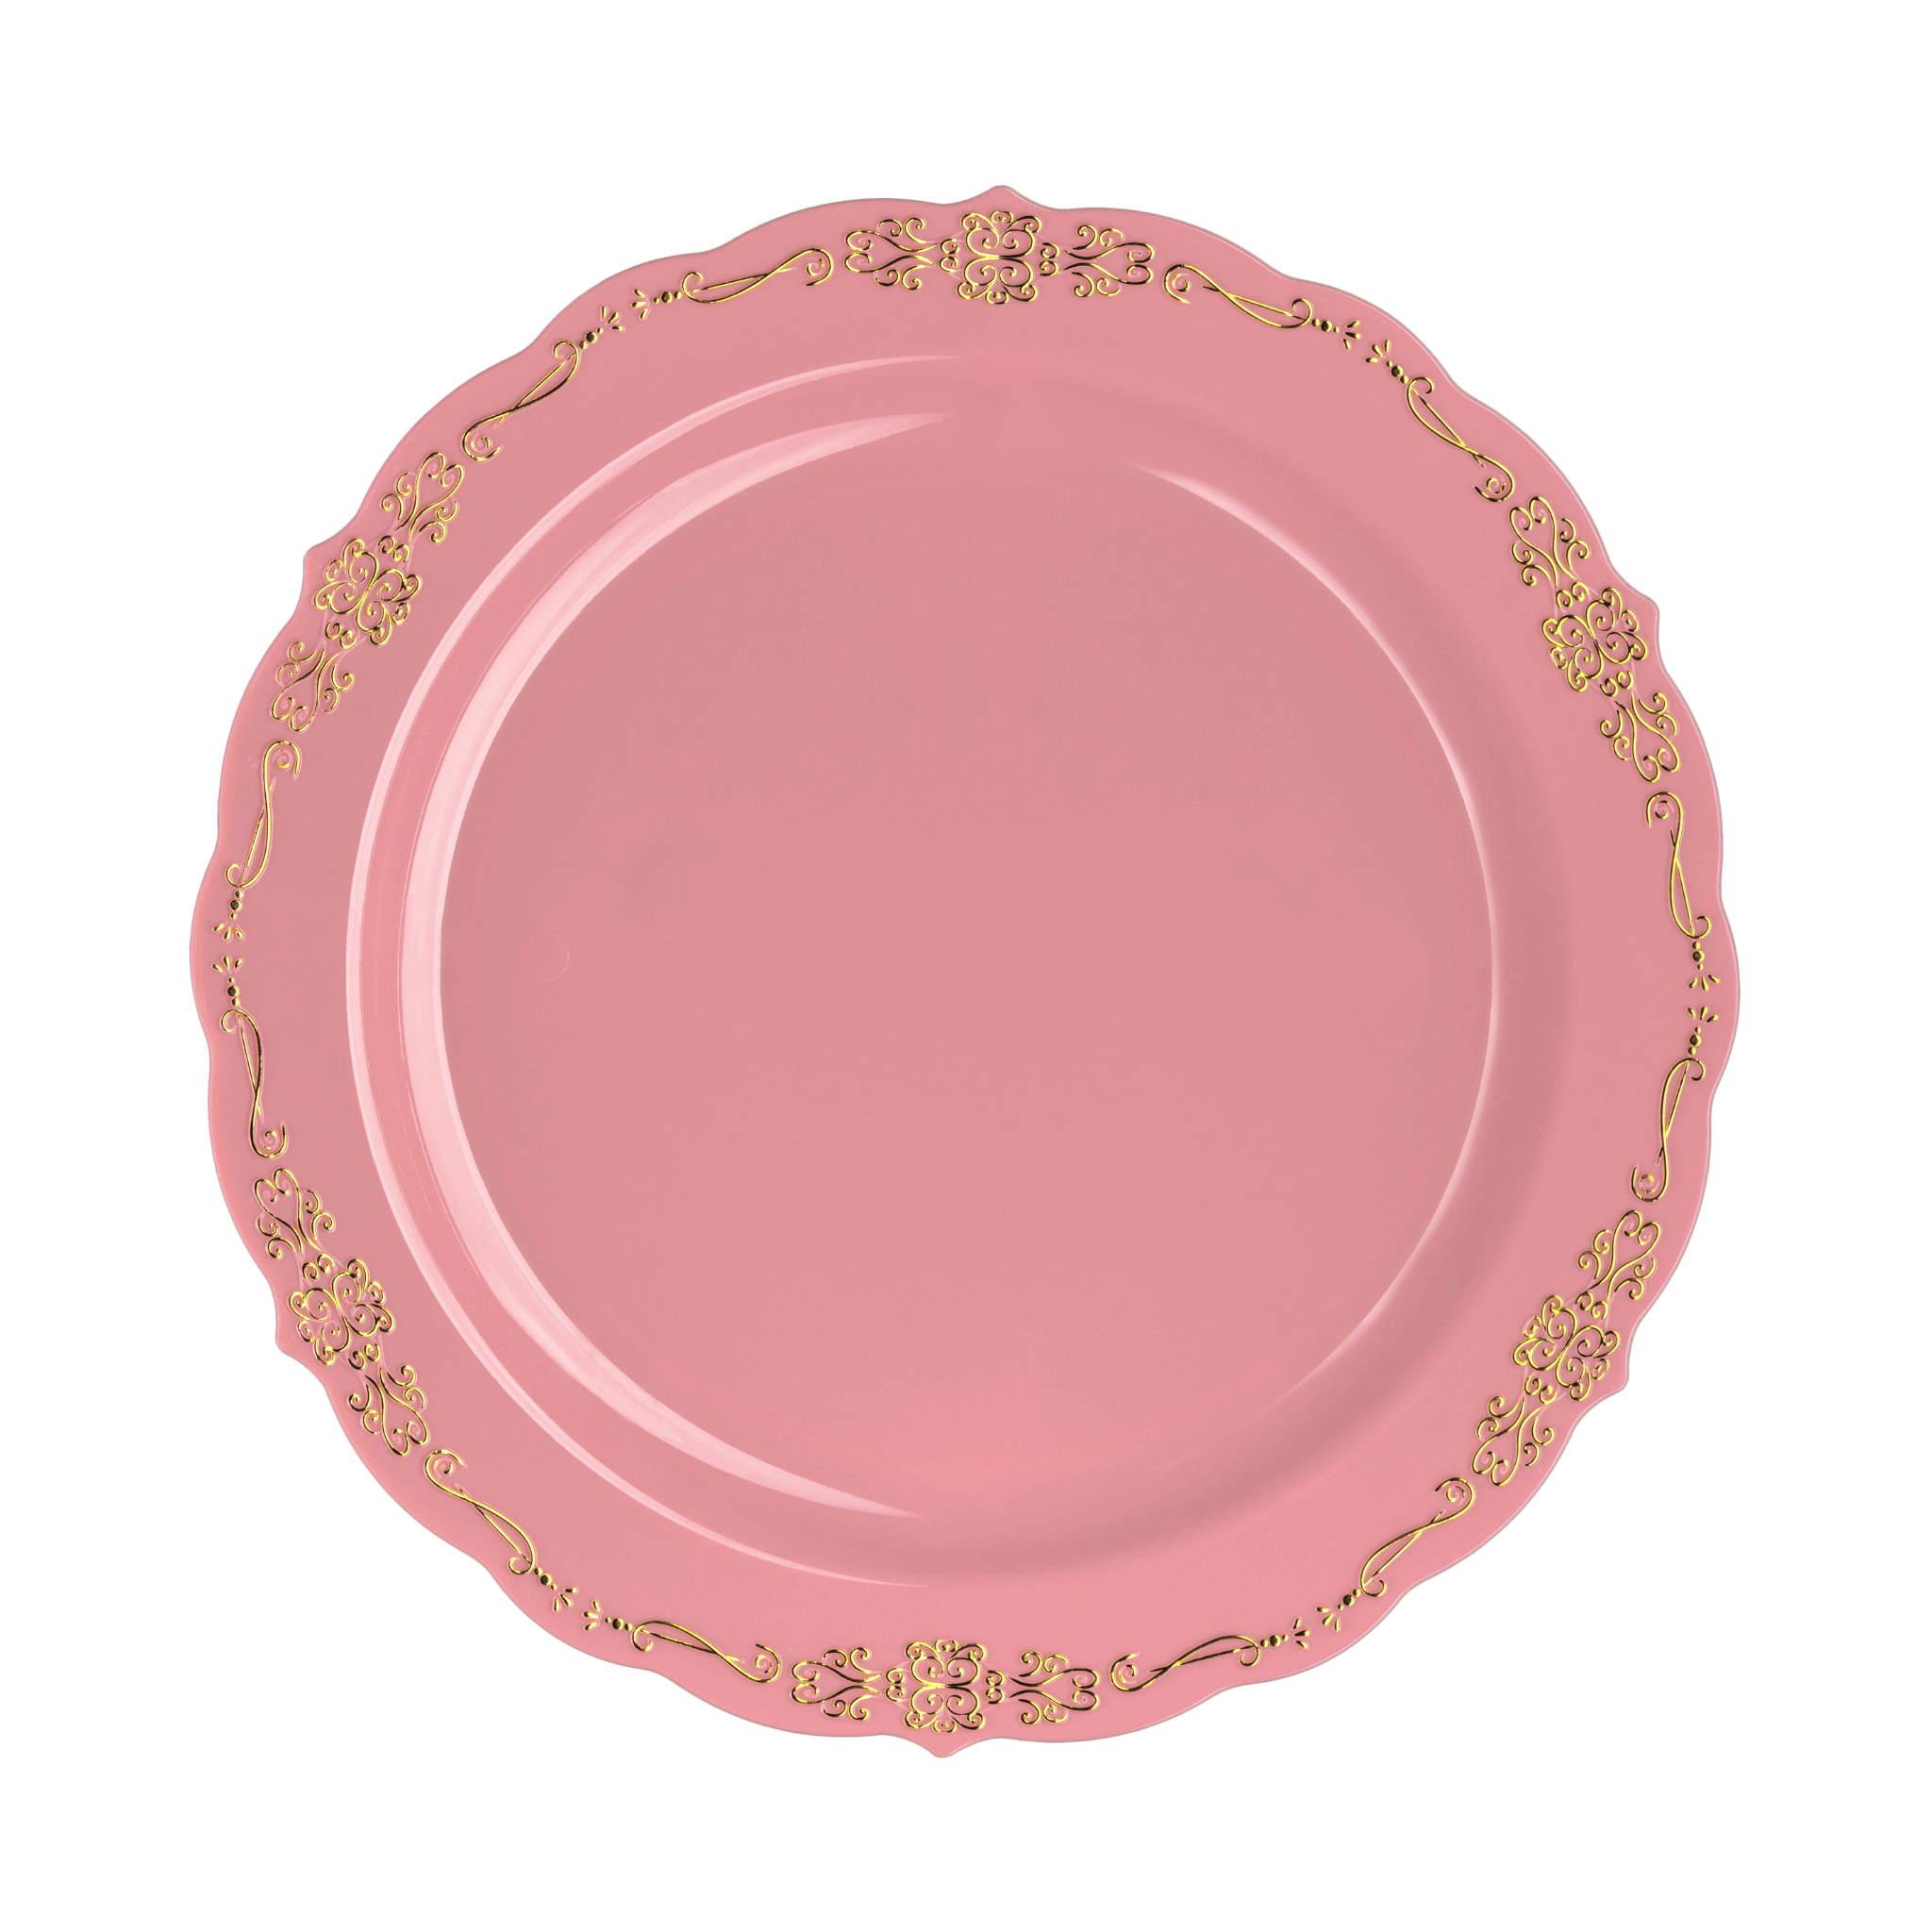 10.25" Coral / Gold Victorian Design Plastic Plates (120 Count) - Yom Tov Settings